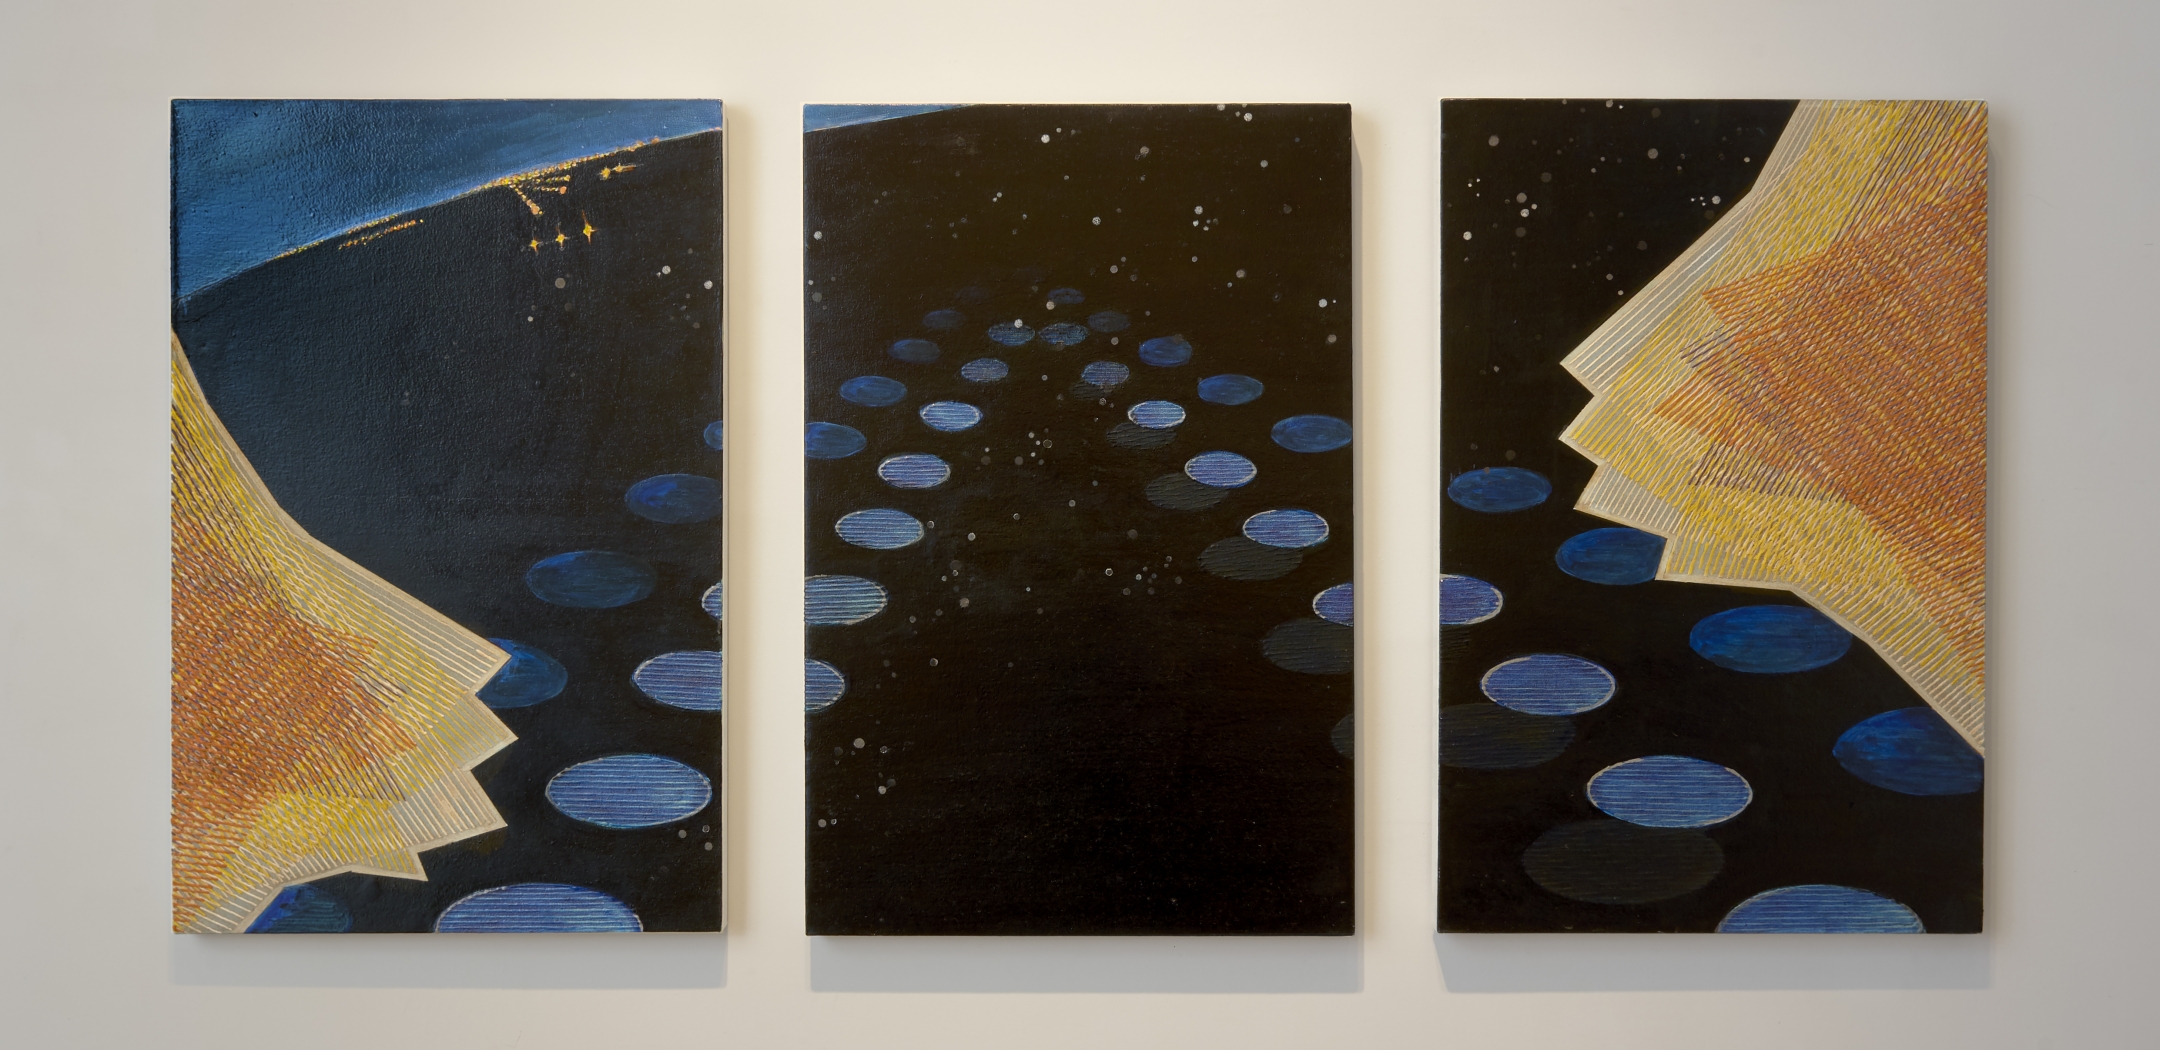 Michiko Itatani  Night Wing from Infinite Vision IV-5, 2006  Oil on canvas  canvas: 35 x 79 inches 3 panels, 35 x 23 inches each; 1-6" intervals  signed and dated en verso